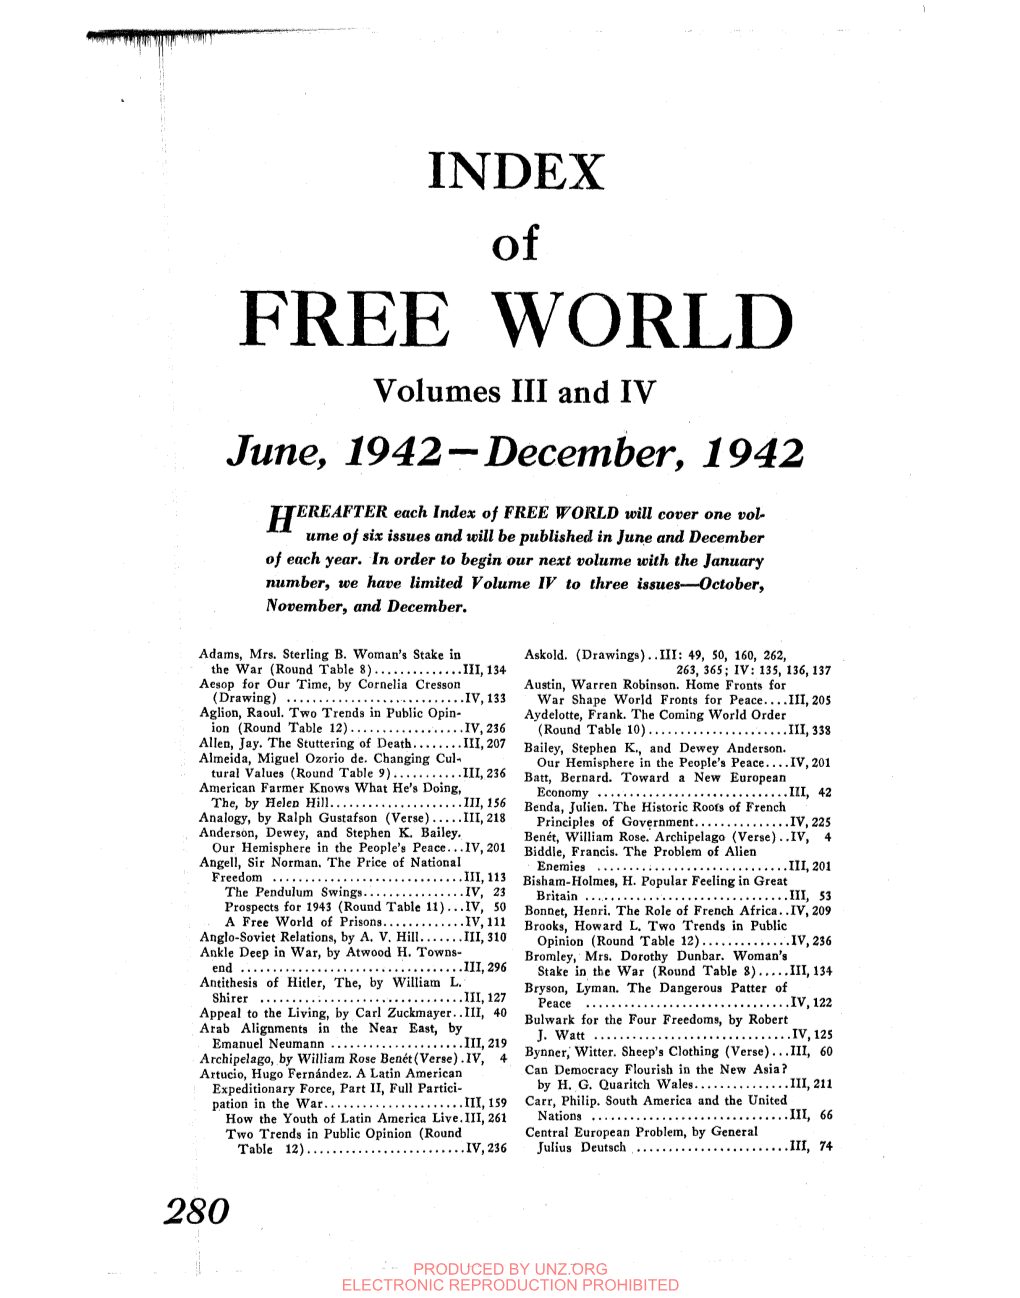 FREE WORLD Volumes III and IV June, 1942—December, 1942